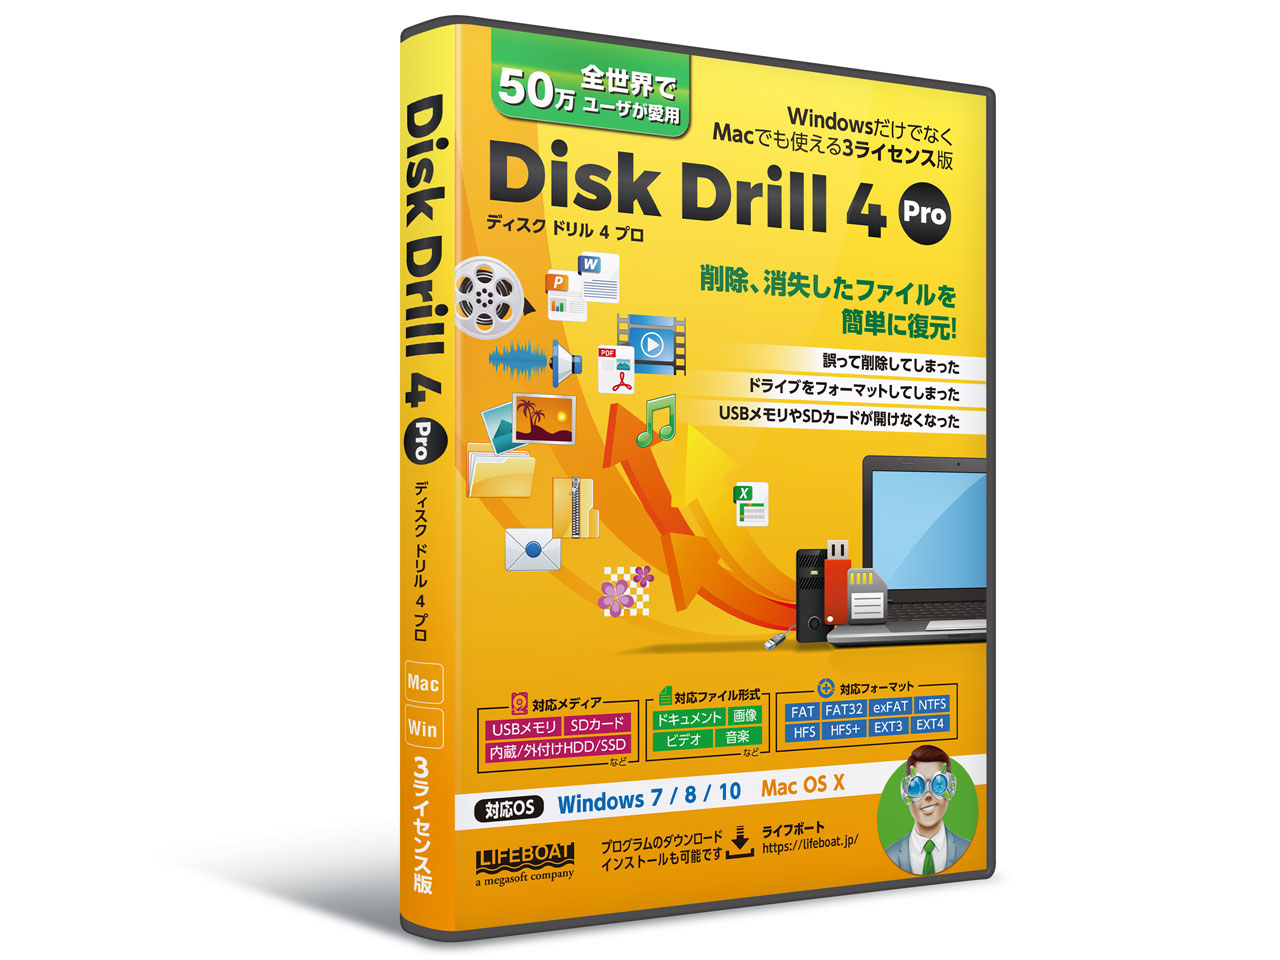 download the new Disk Drill Pro 5.3.825.0